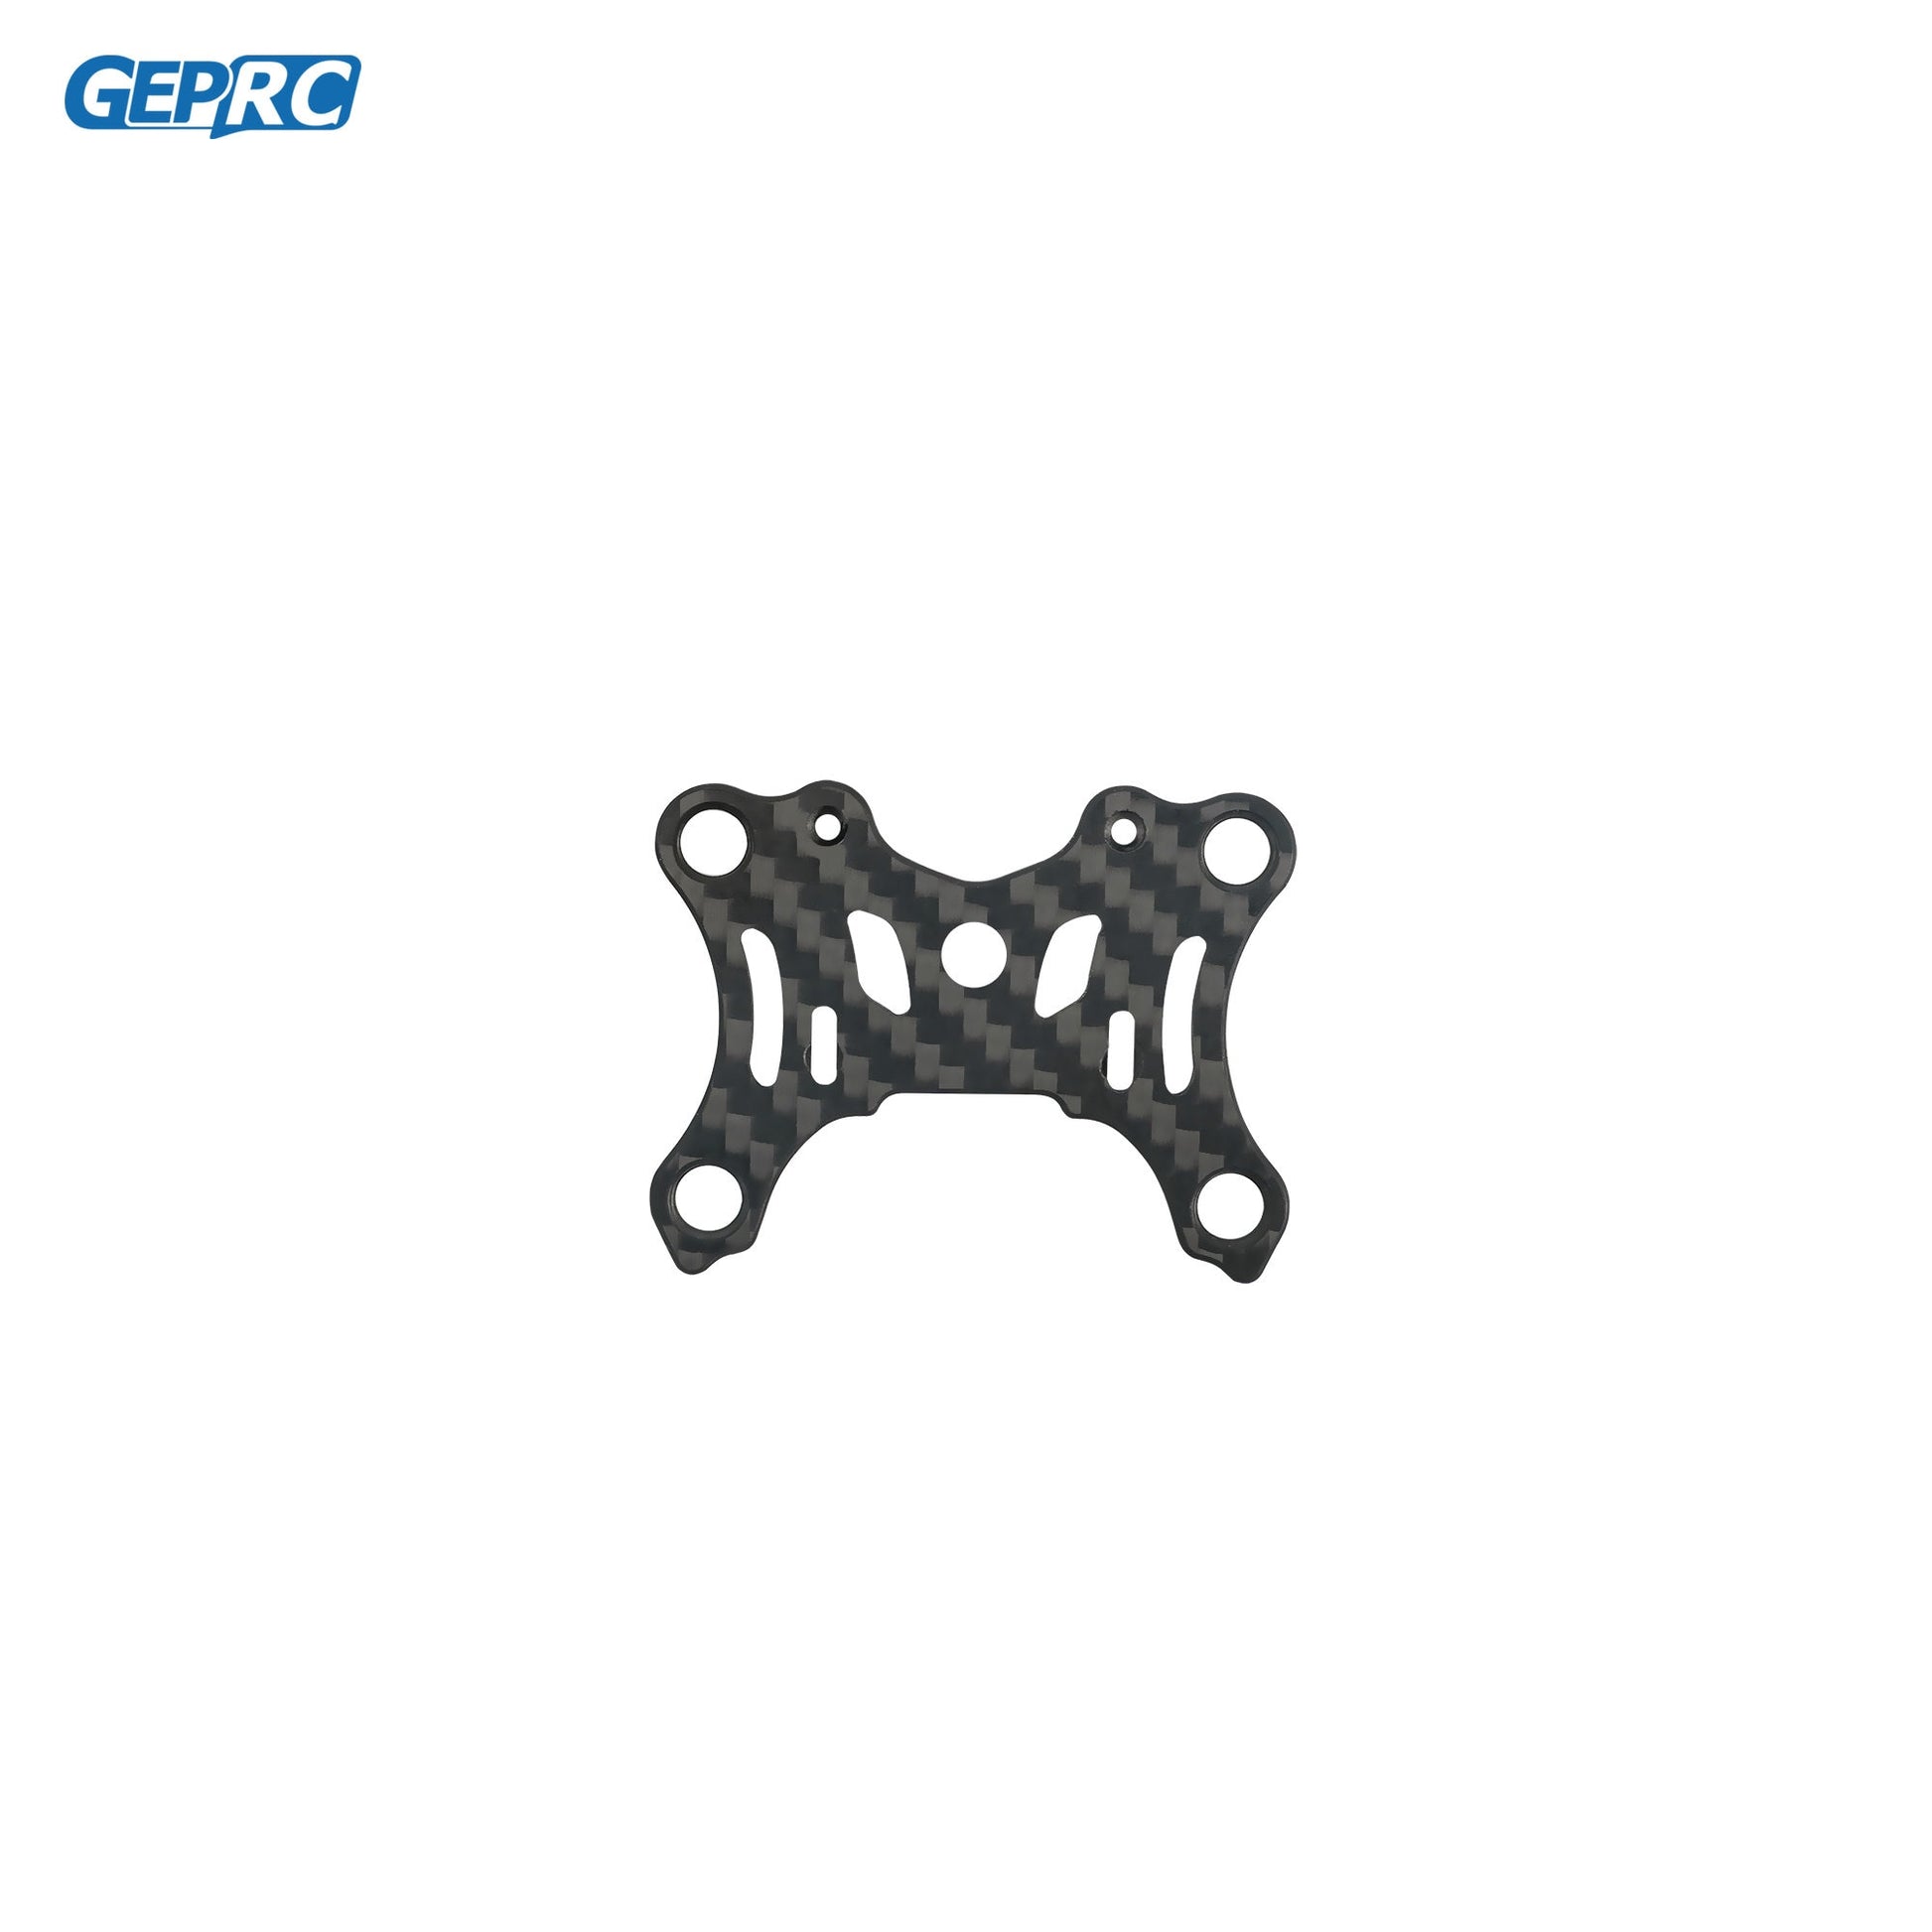 GEPRC GEP-CT30 O3 Frame Parts - Upgrade Package 3D Printing Aluminum Parts Base Quadcopter FPV Freestyle RC Racing Drone Cinebot30